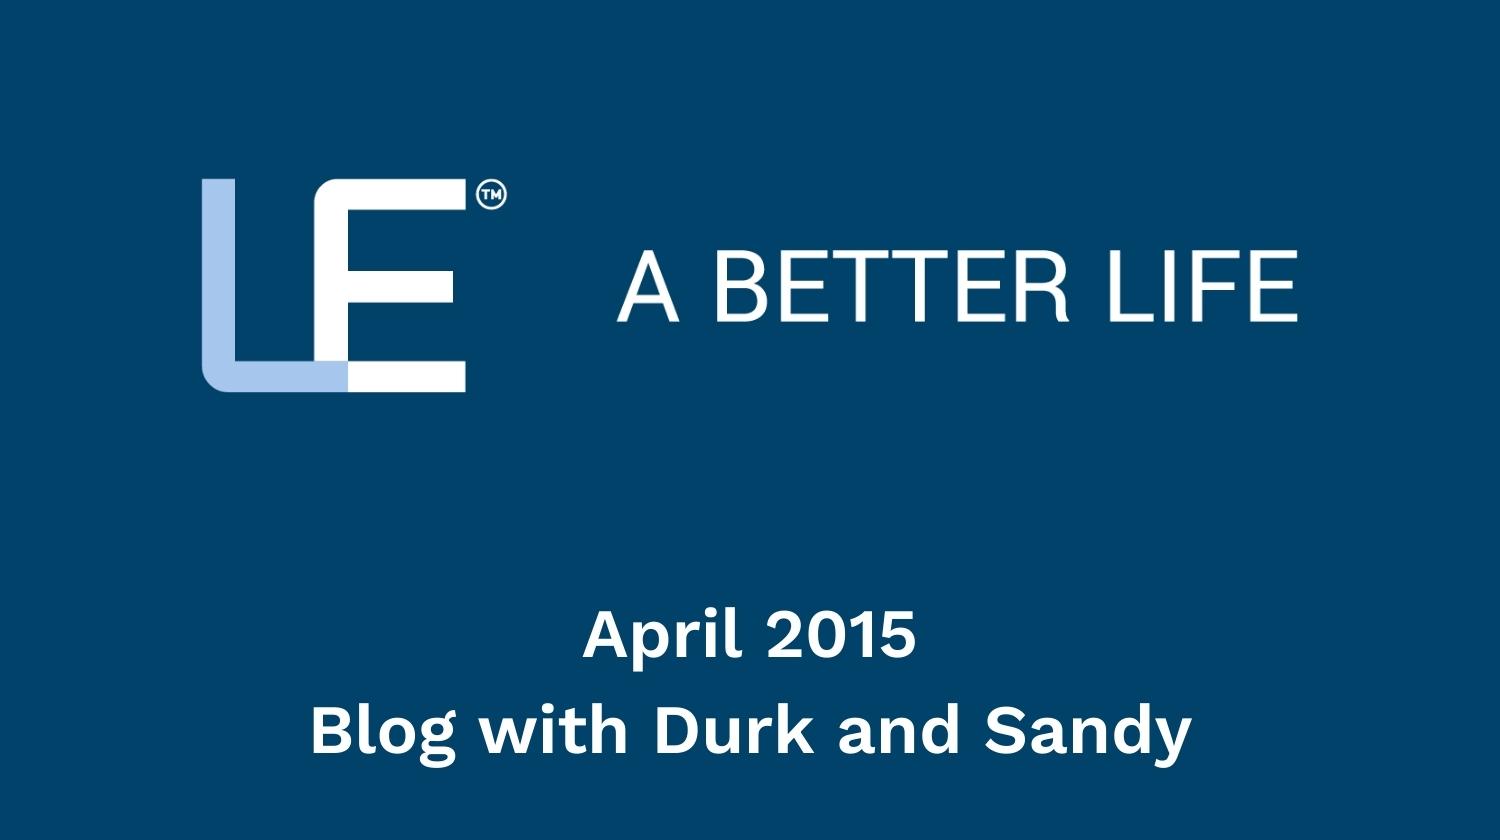 April 2015 Blog with Durk and Sandy